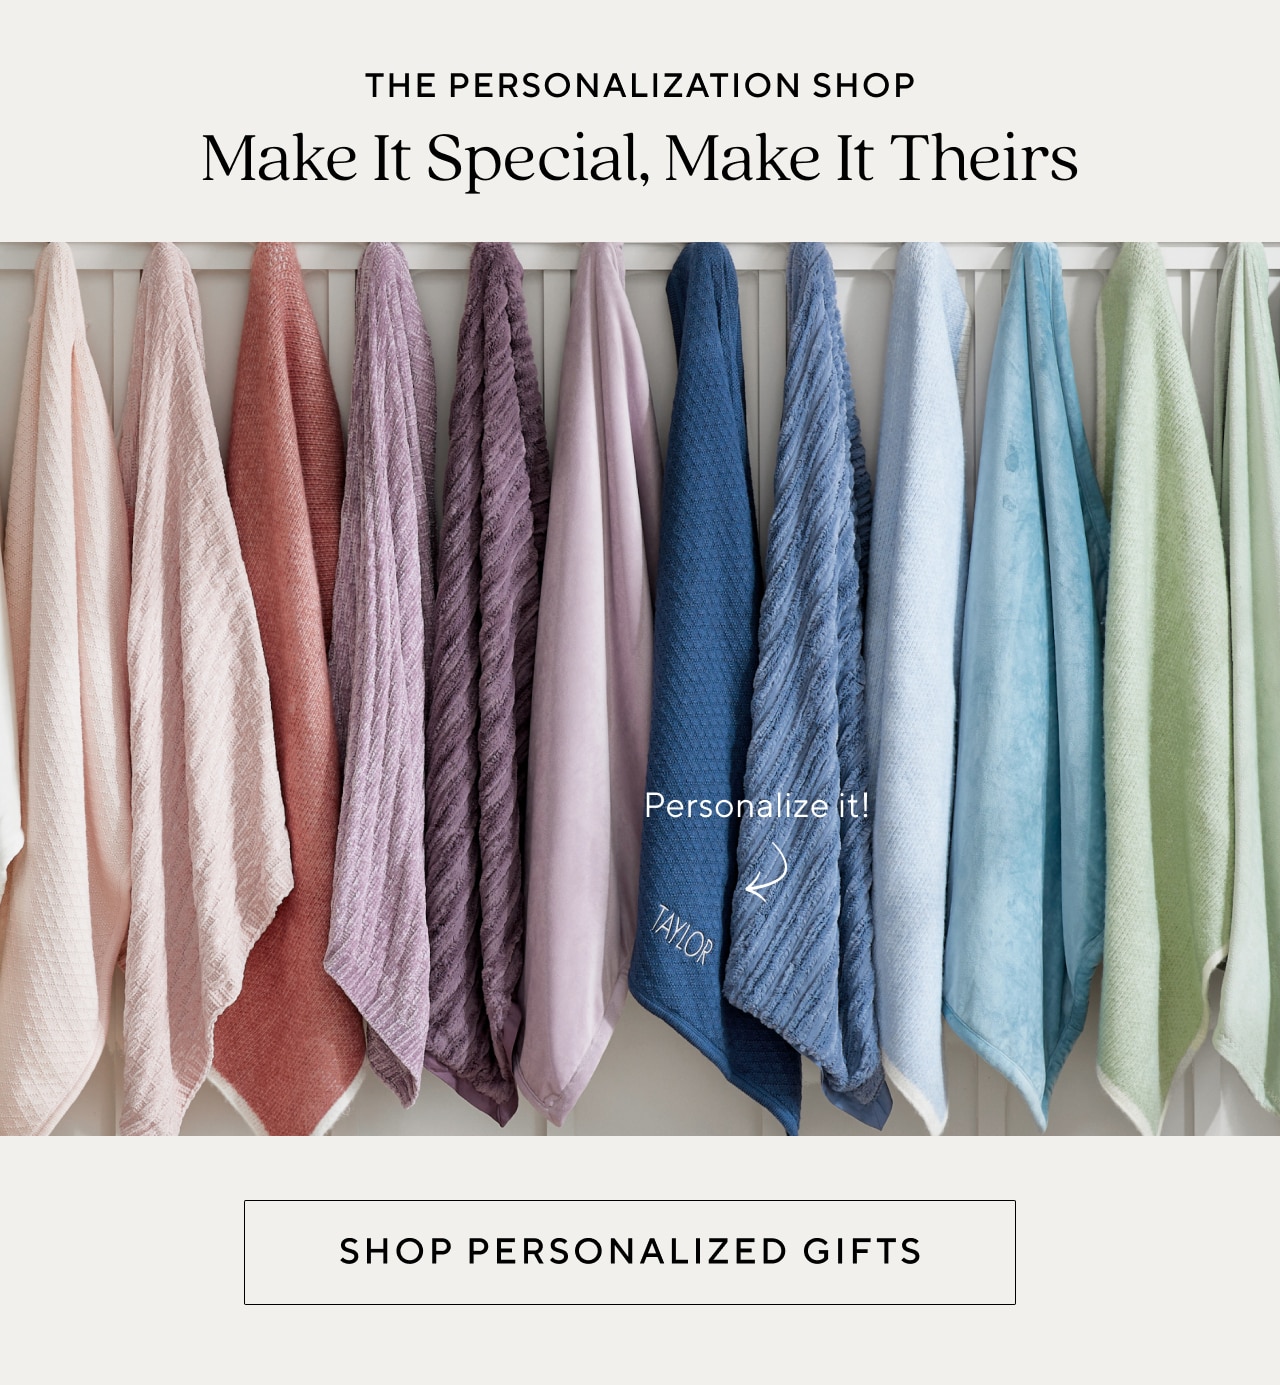 THE PERSONALIZATION SHOP